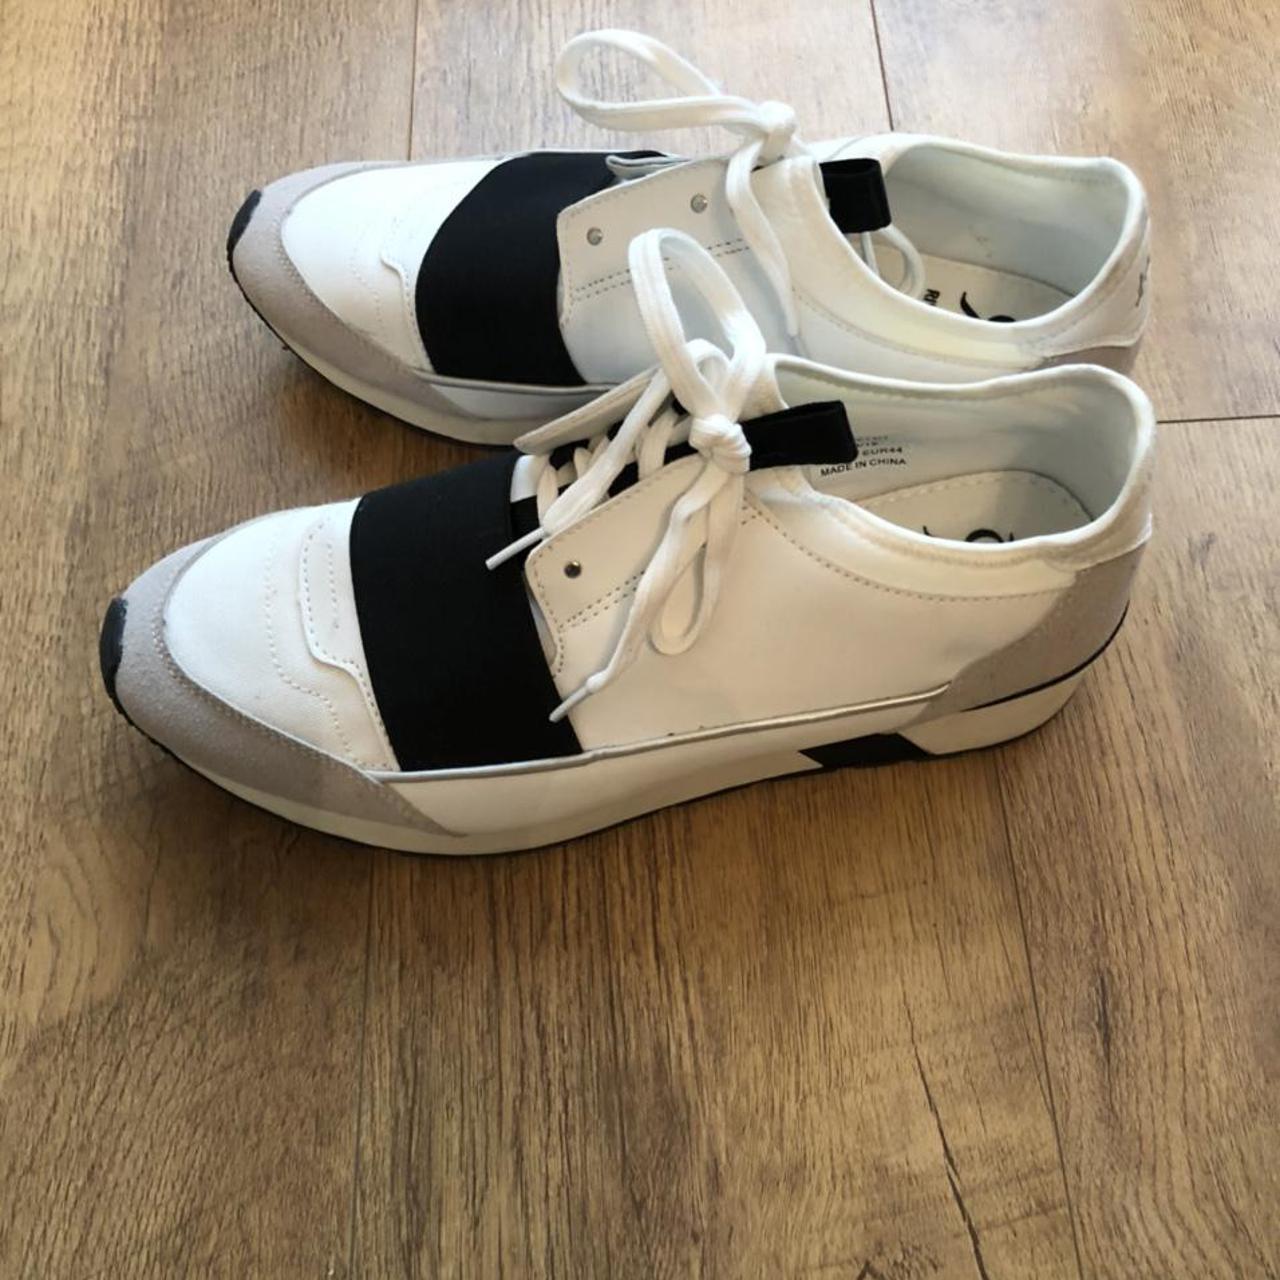 Mens size 10 trainers. Worn for 10 minutes just too... - Depop